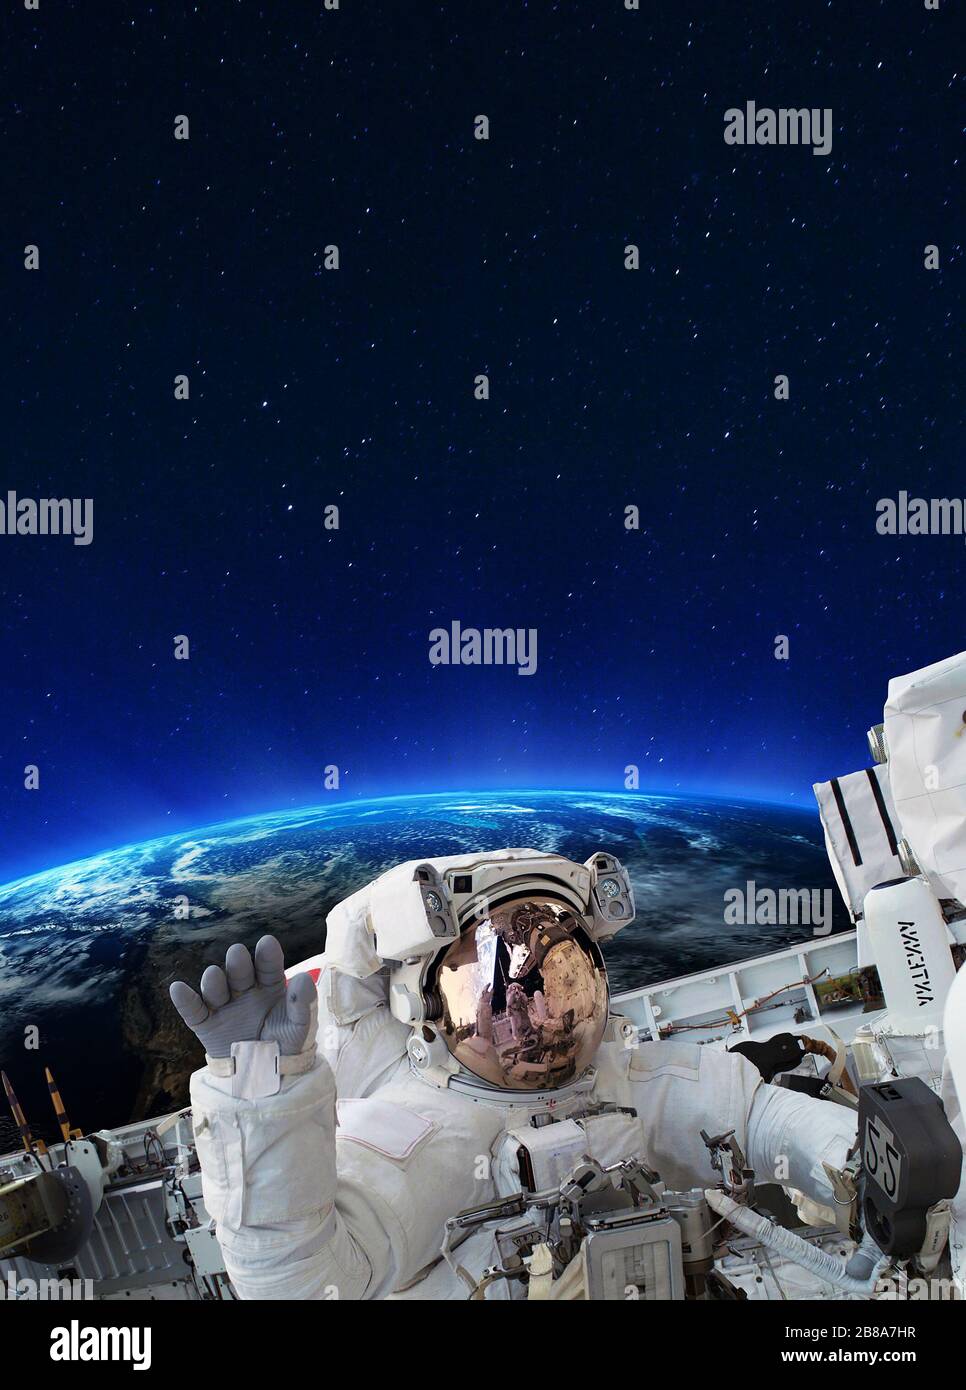 Astronaut on space mission with earth on the background. Elements of this image furnished by NASA. Stock Photo